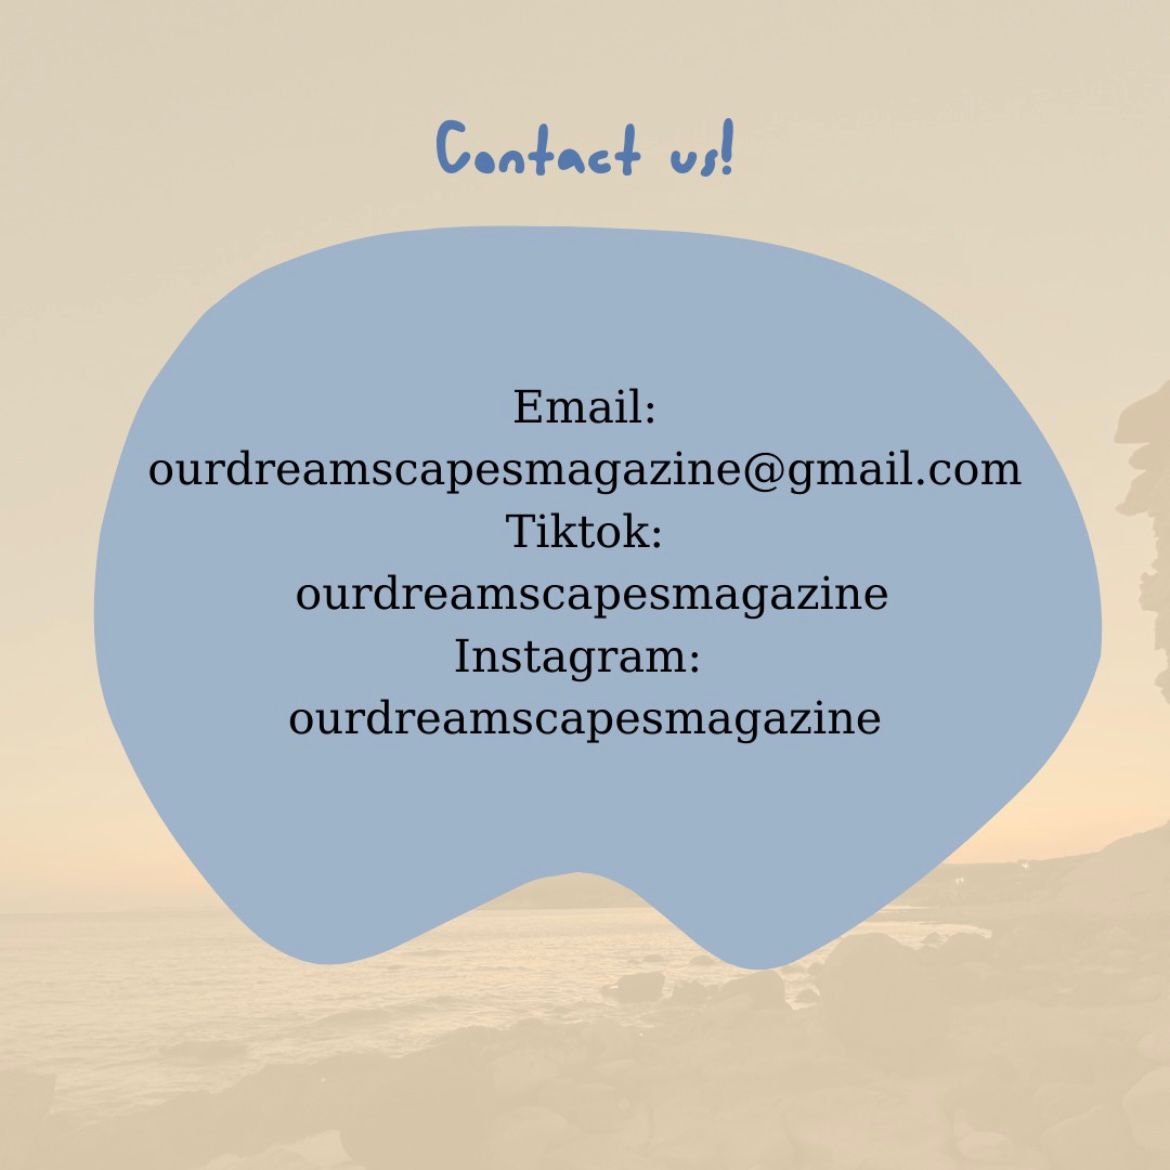 Welcome to our magazine! Access our website from the link in our bio!
.
.
.
#art #MAGAZINE #ArtMagazines